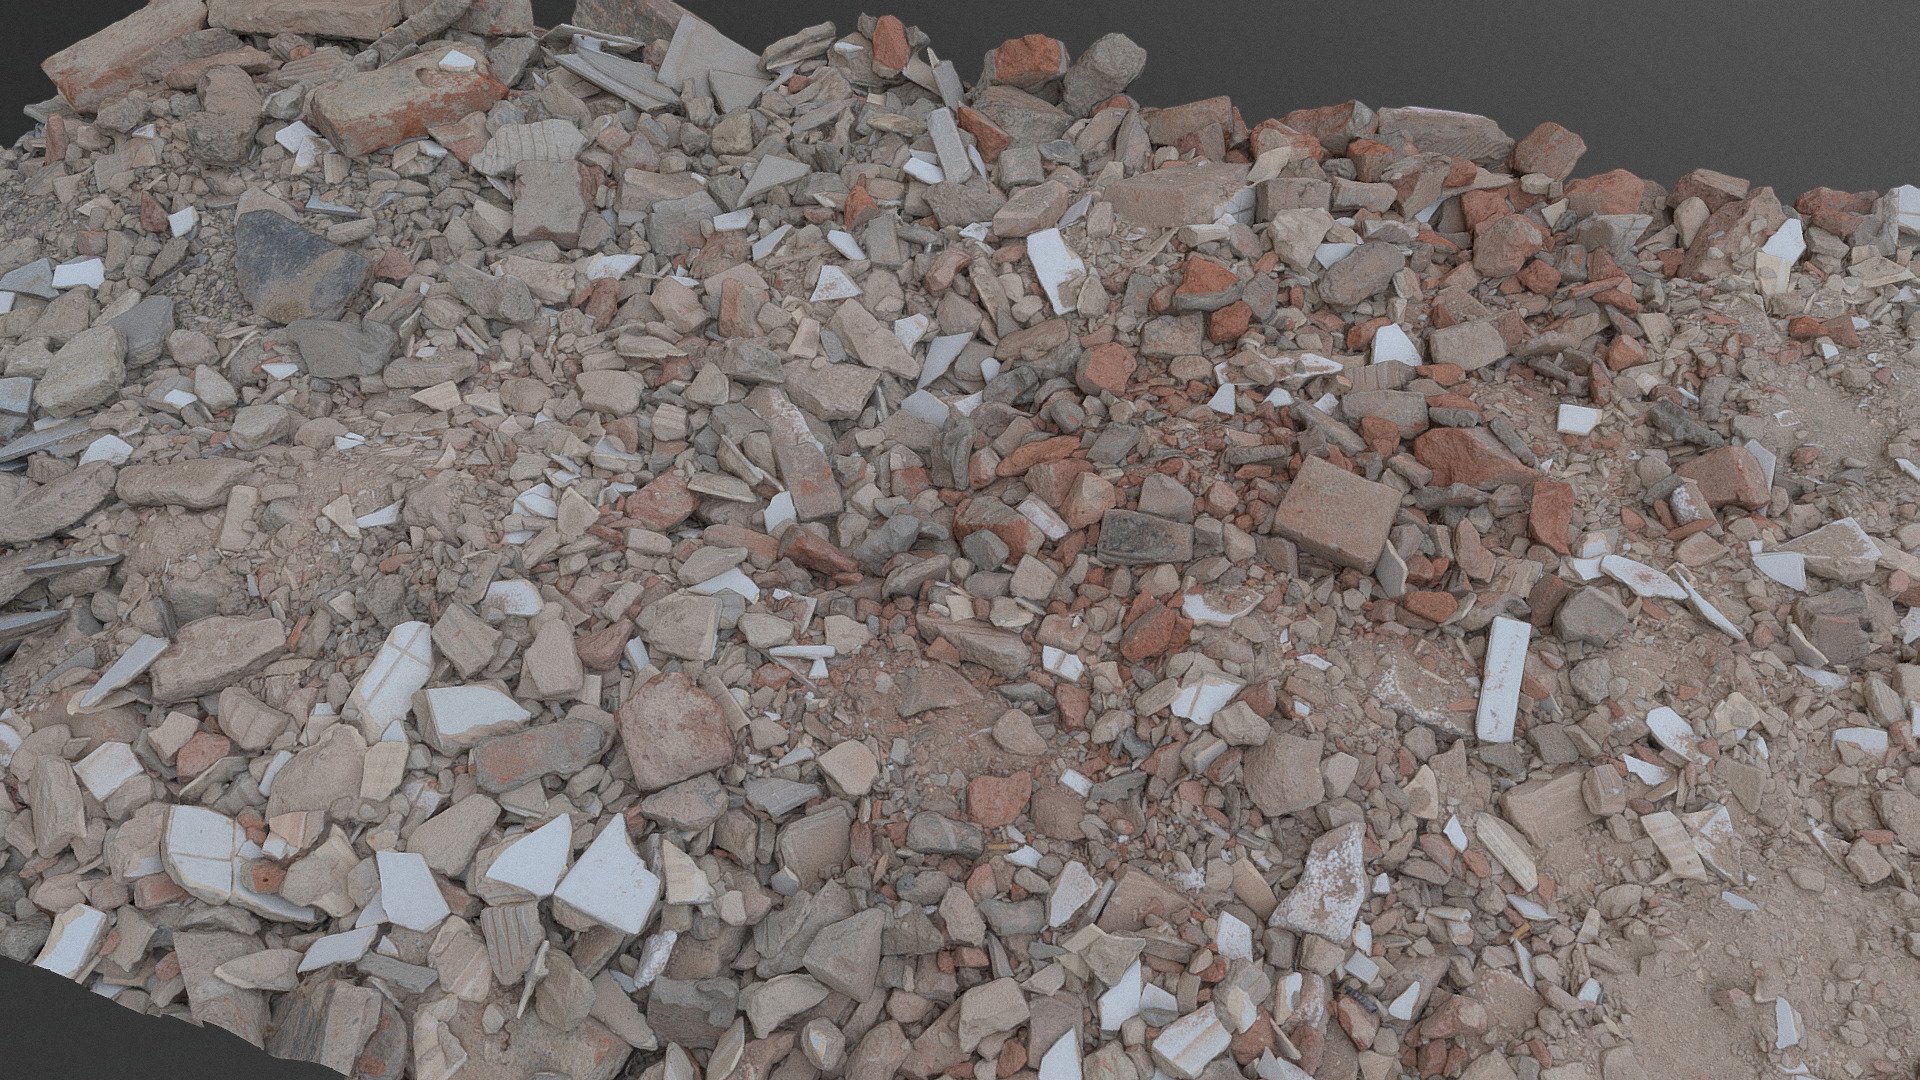 Truckload of debris dump of building demolition demolished ruin White gray bricks, plasterboard and stones rubble debris pieces pile heap of scrap material

photogrammetry scan (140x36mp), 4x8k textures + HD normals - Truckload of debris - Buy Royalty Free 3D model by matousekfoto 3d model